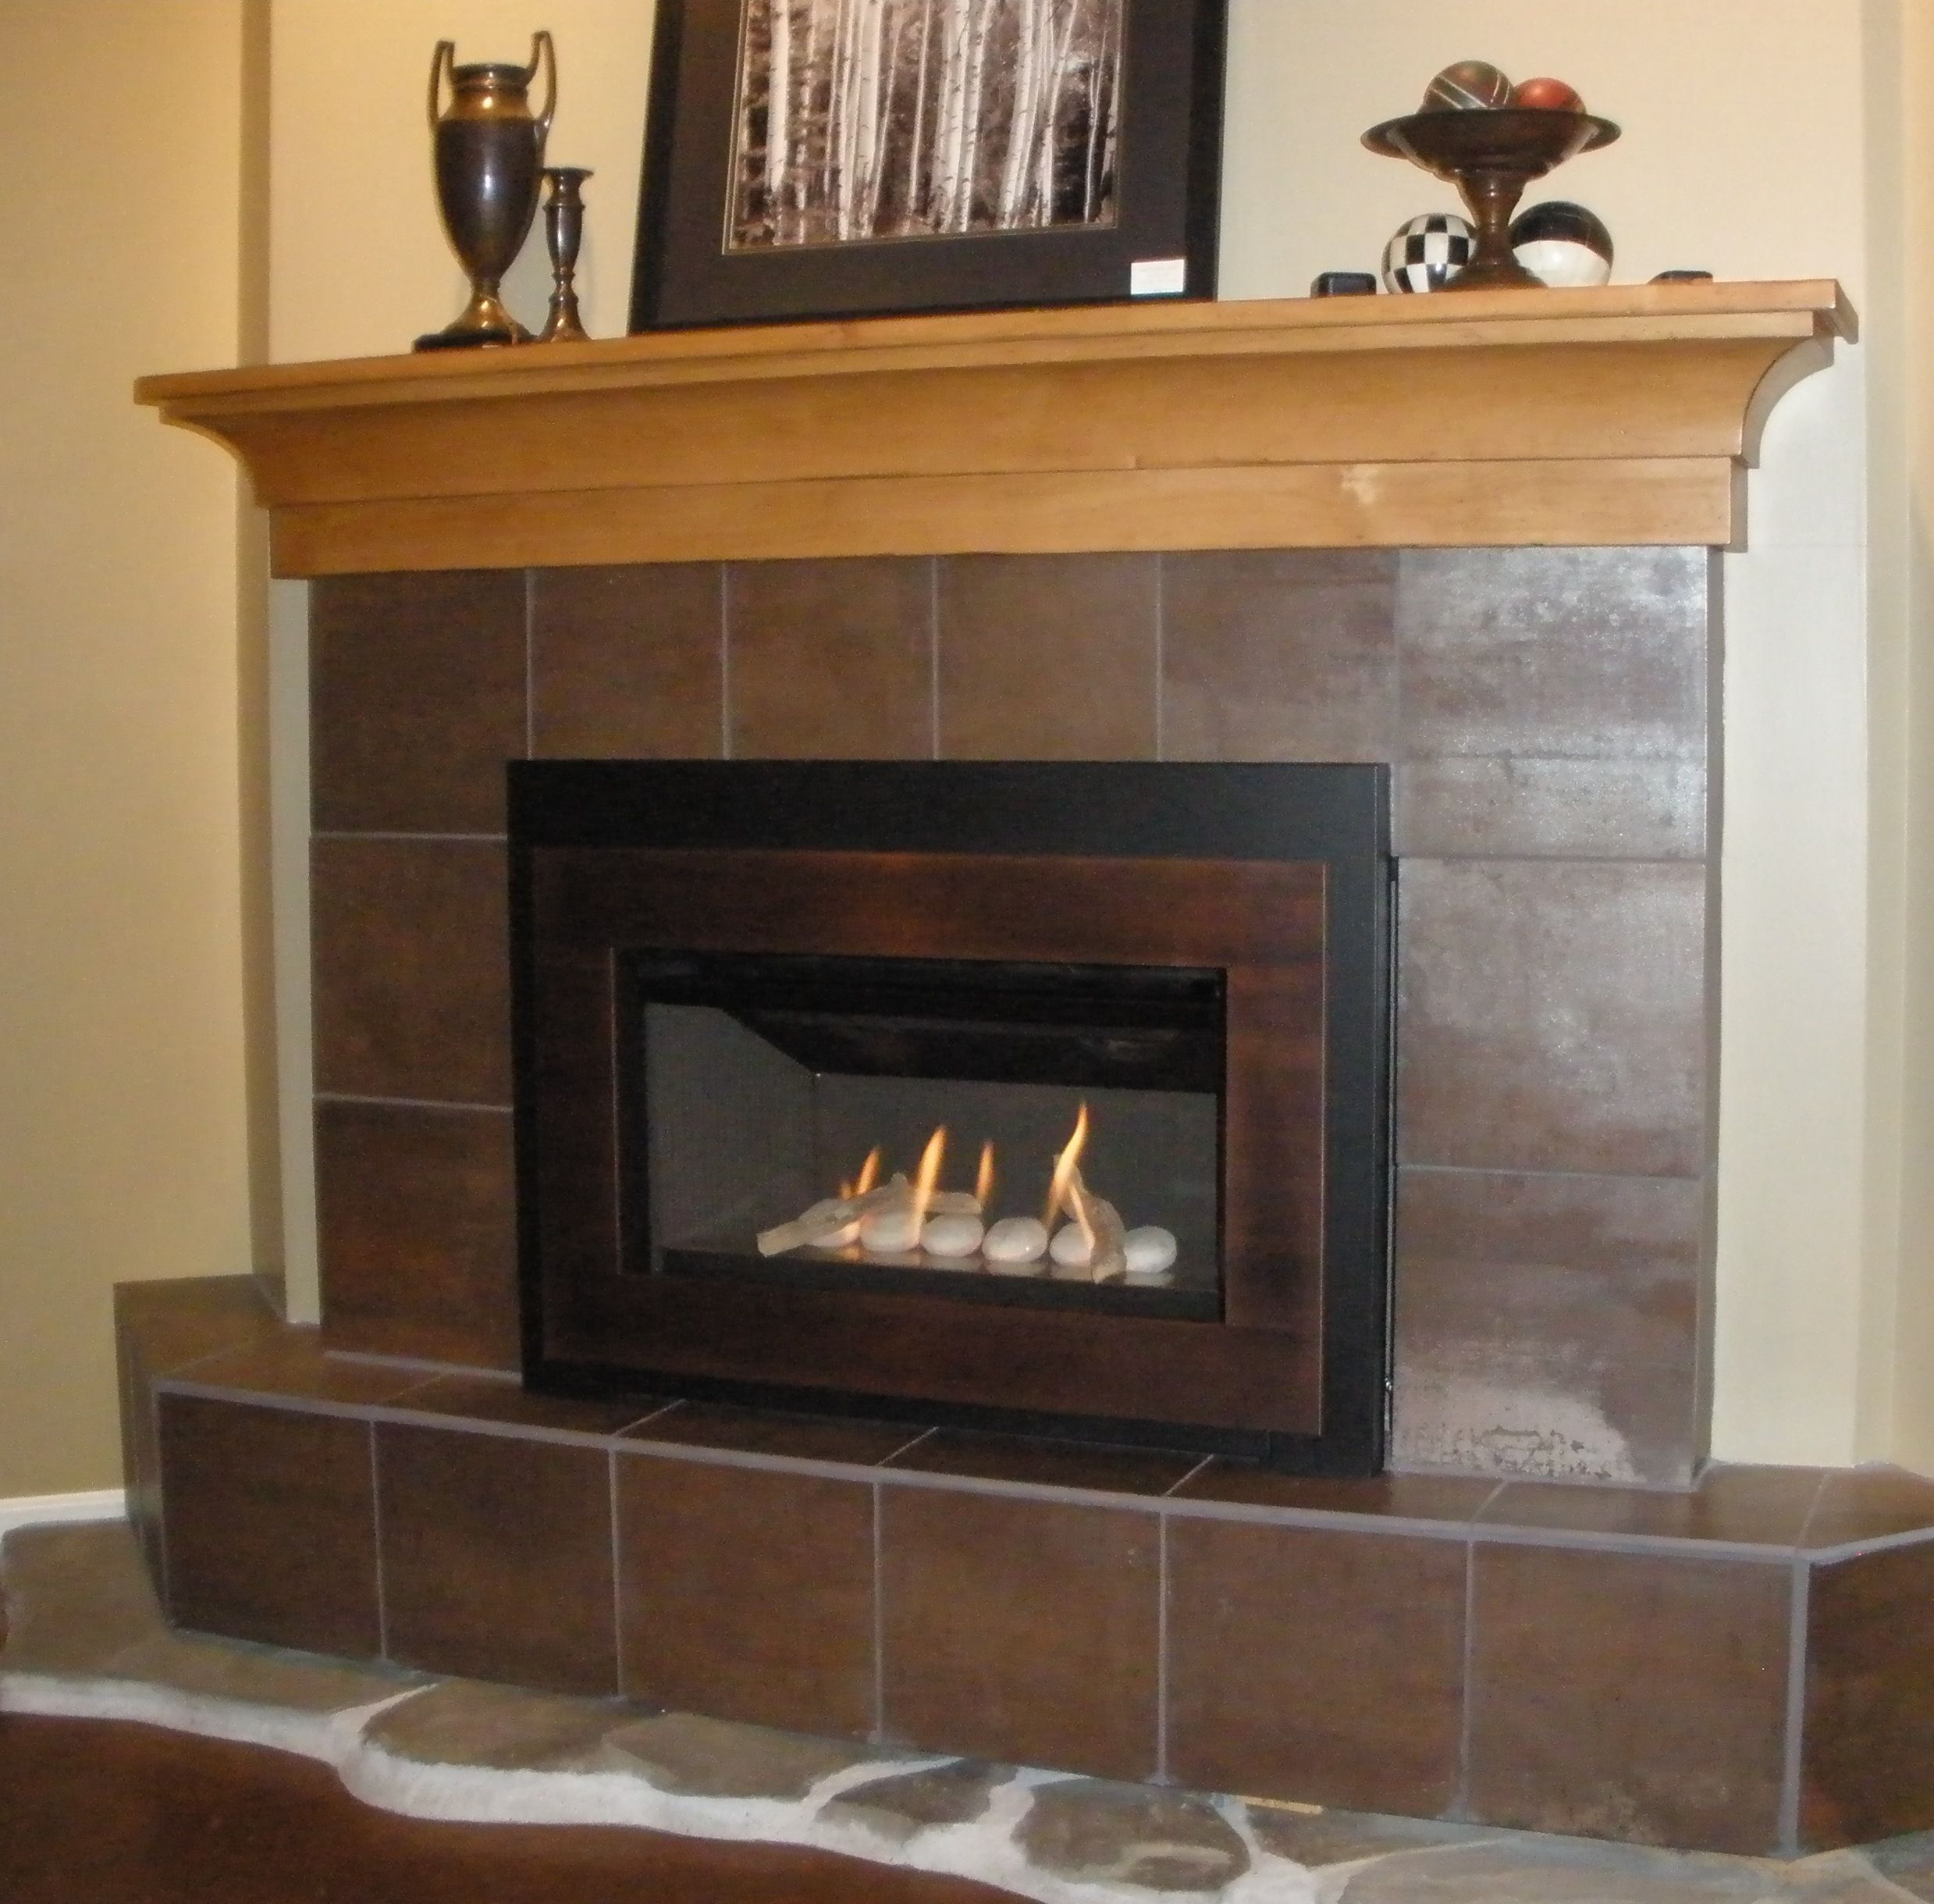 Midwest Fireplace New Pin On Valor Radiant Gas Fireplaces Midwest Dealer